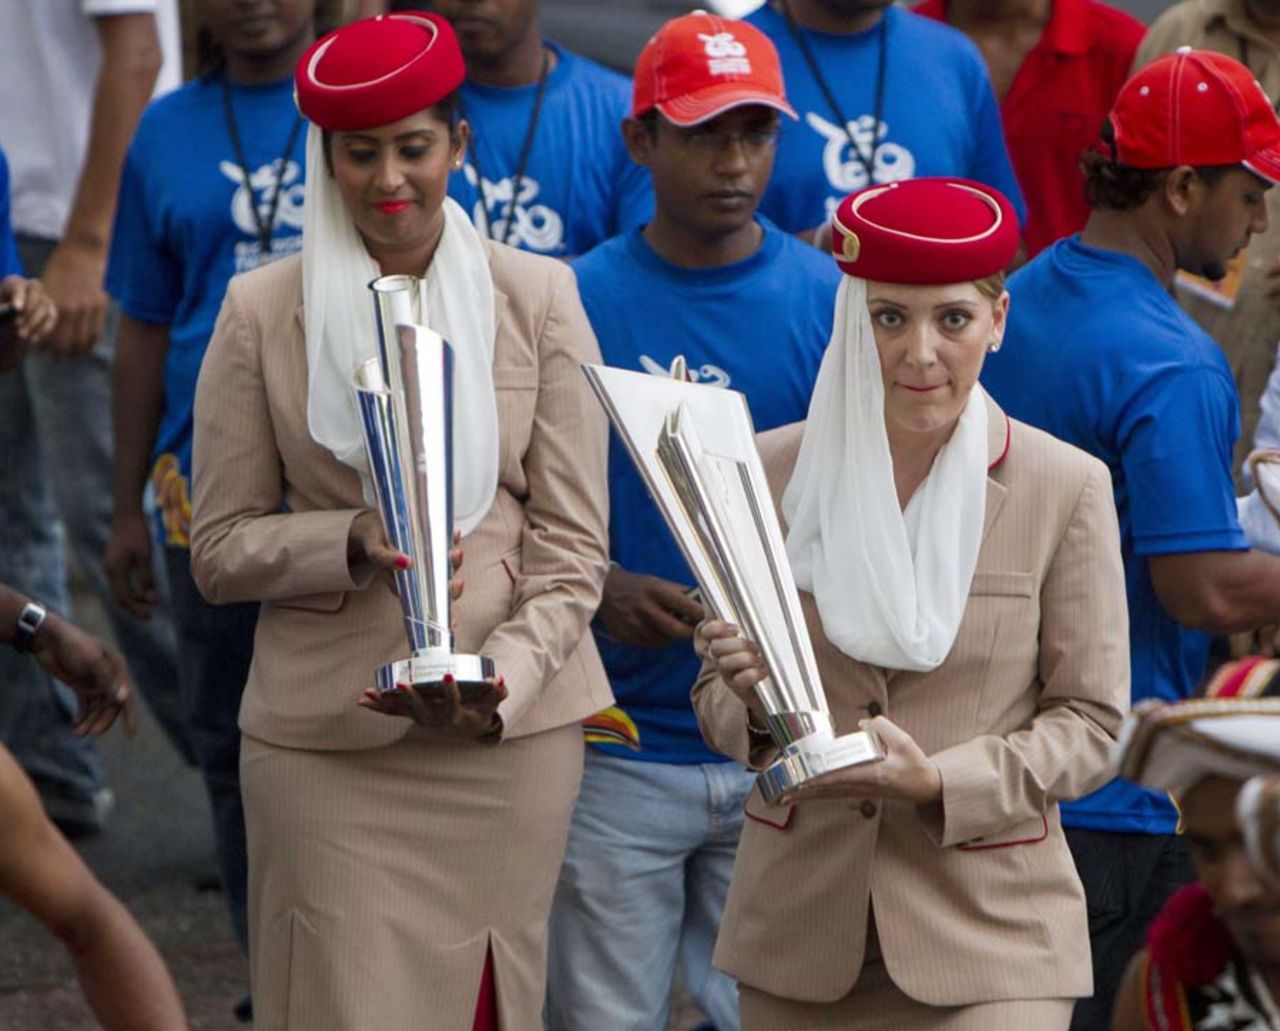 Air hostesses hold the World T20 trophy in a ceremony to hand over the trophy to Sri Lankan sports minister after its arrival from Dubai, Colombo, August 29, 2012